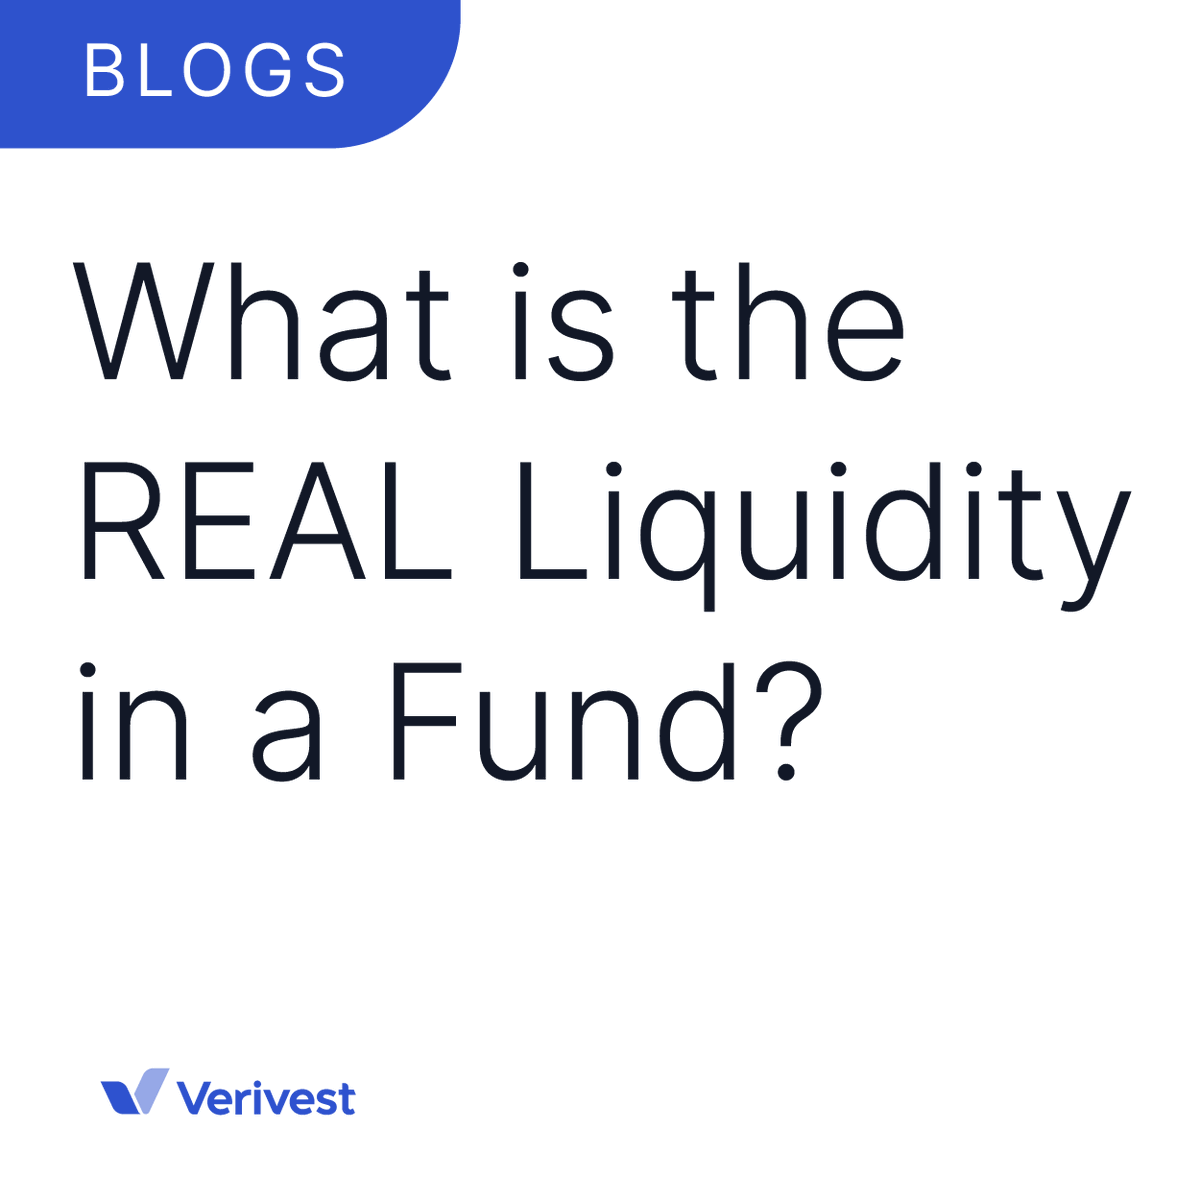 Effective management of funds requires deep insight into their complexity, market impacts, and structuring for both managers and investors. How does one find the liquidity? Find out more hubs.li/Q02tDfQg0
#FundManagement #Funds #Blog